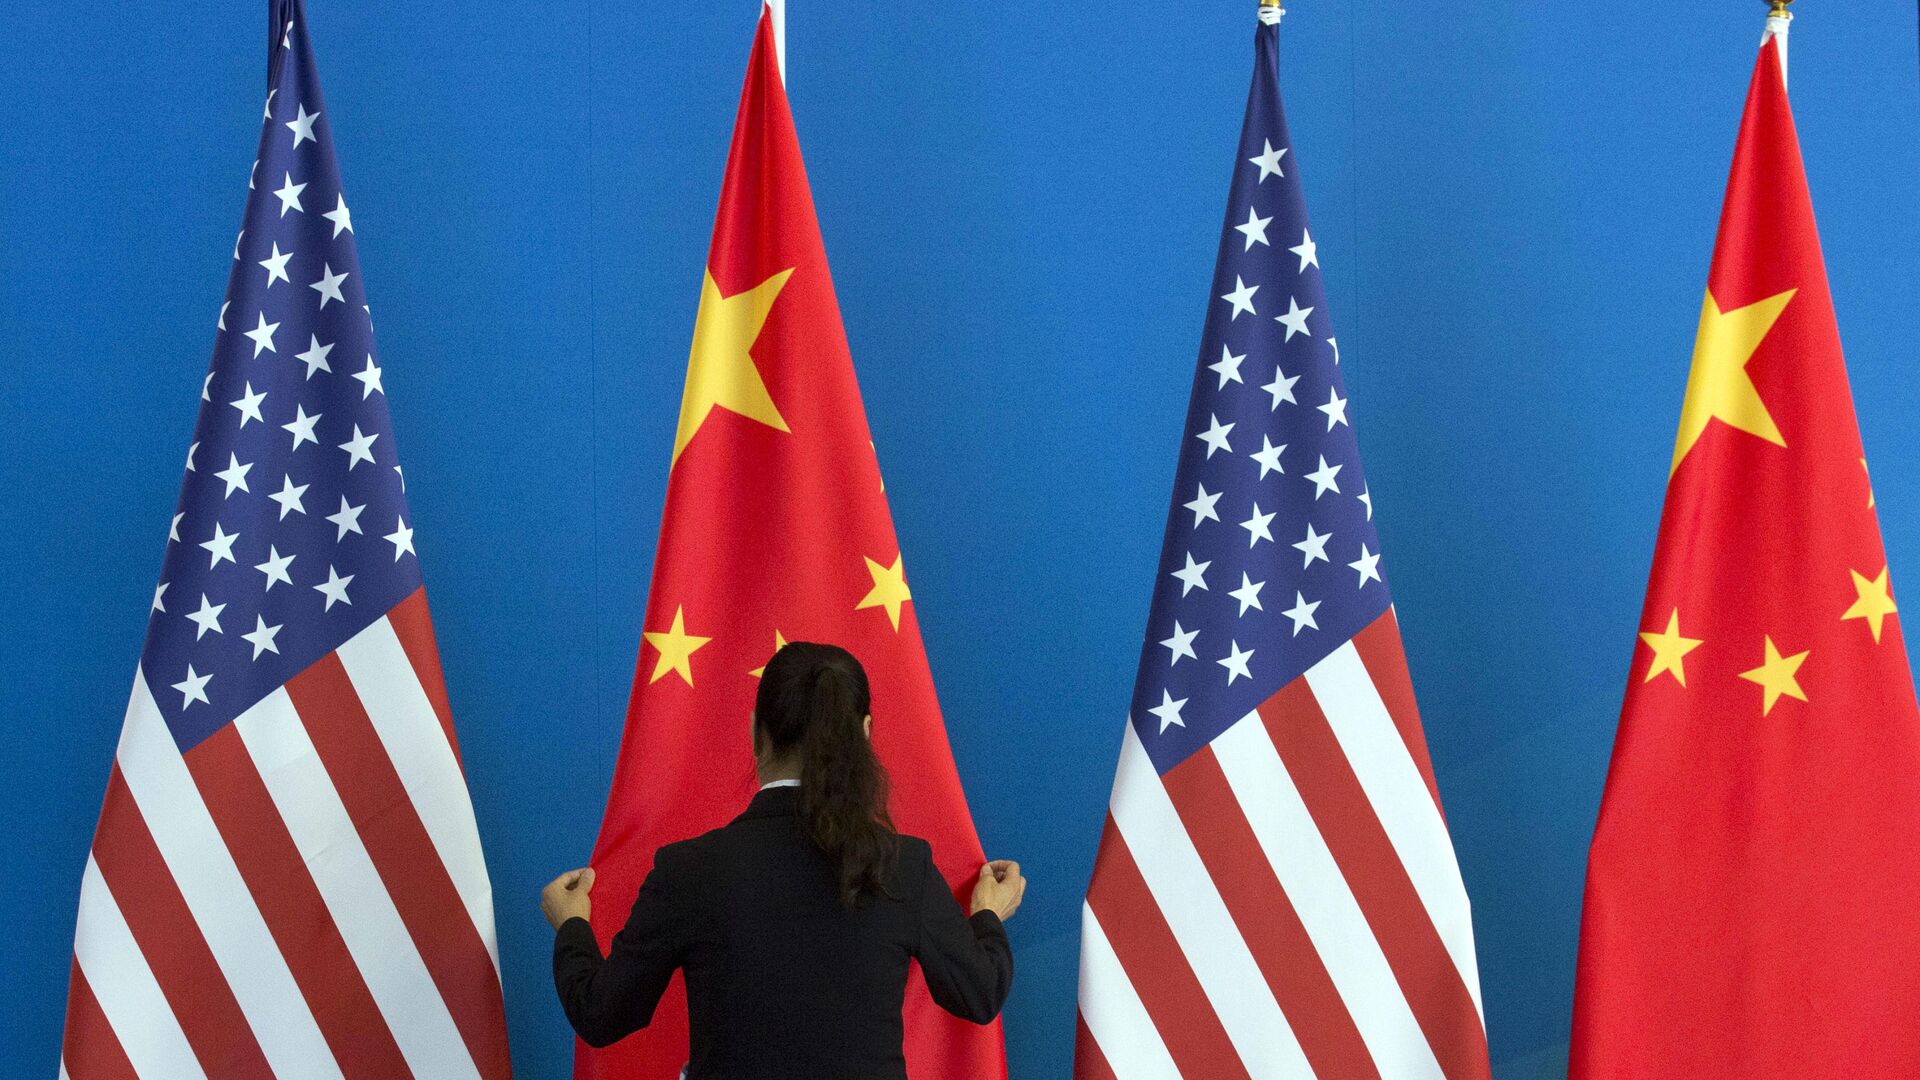 A Chinese woman adjusts the Chinese national flag near U.S. national flags before a Strategic Dialogue expanded meeting that's part of the U.S.-China Strategic and Economic Dialogue at the Diaoyutai State Guesthouse in Beijing, Thursday, July 10, 2014 - Sputnik International, 1920, 05.08.2022